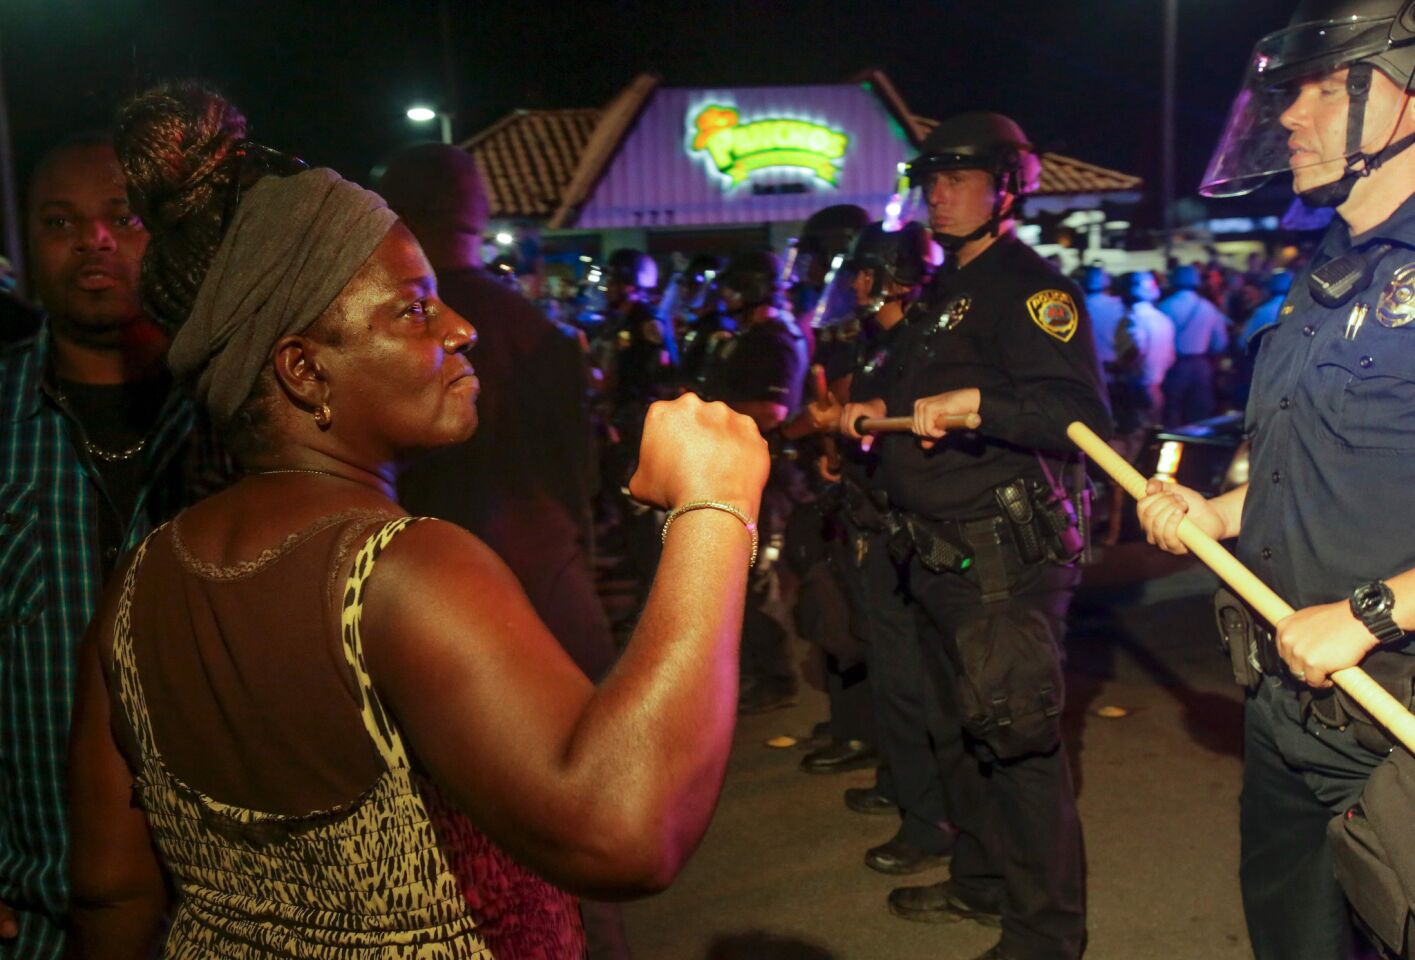 Protesters face off with police in El Cajon after the shooting of Alfred Olango.